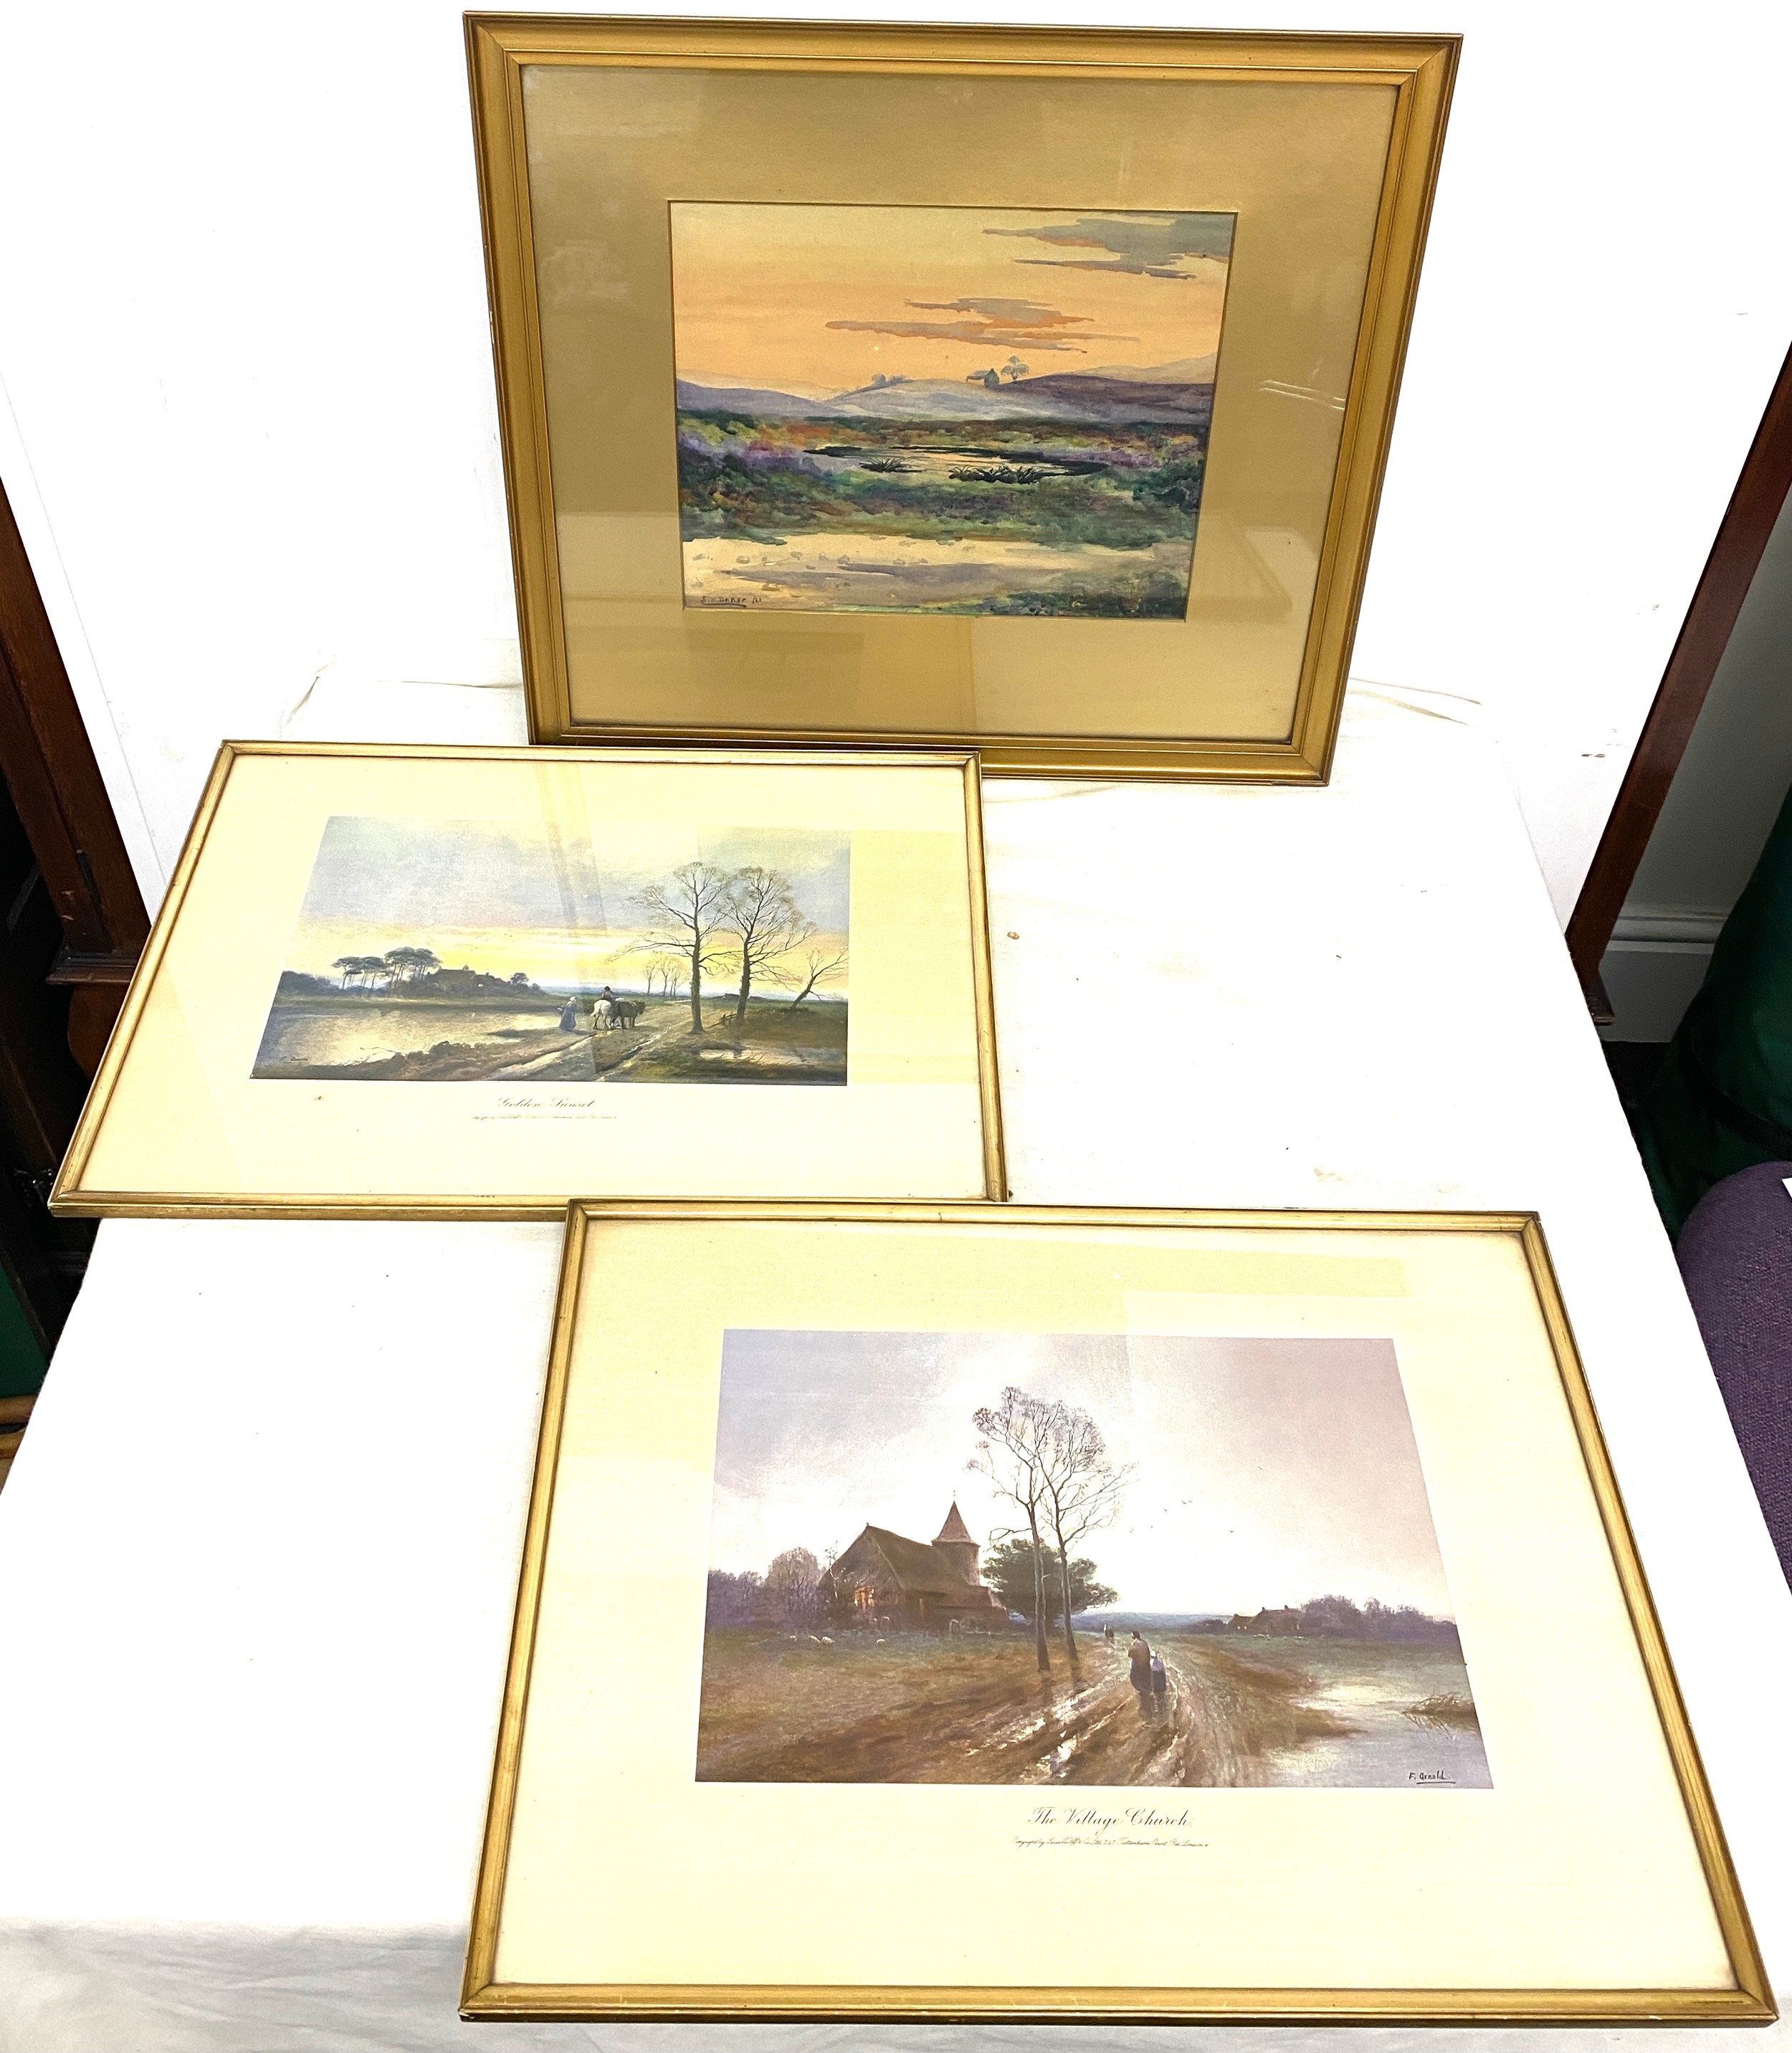 Two framed prints and one painting